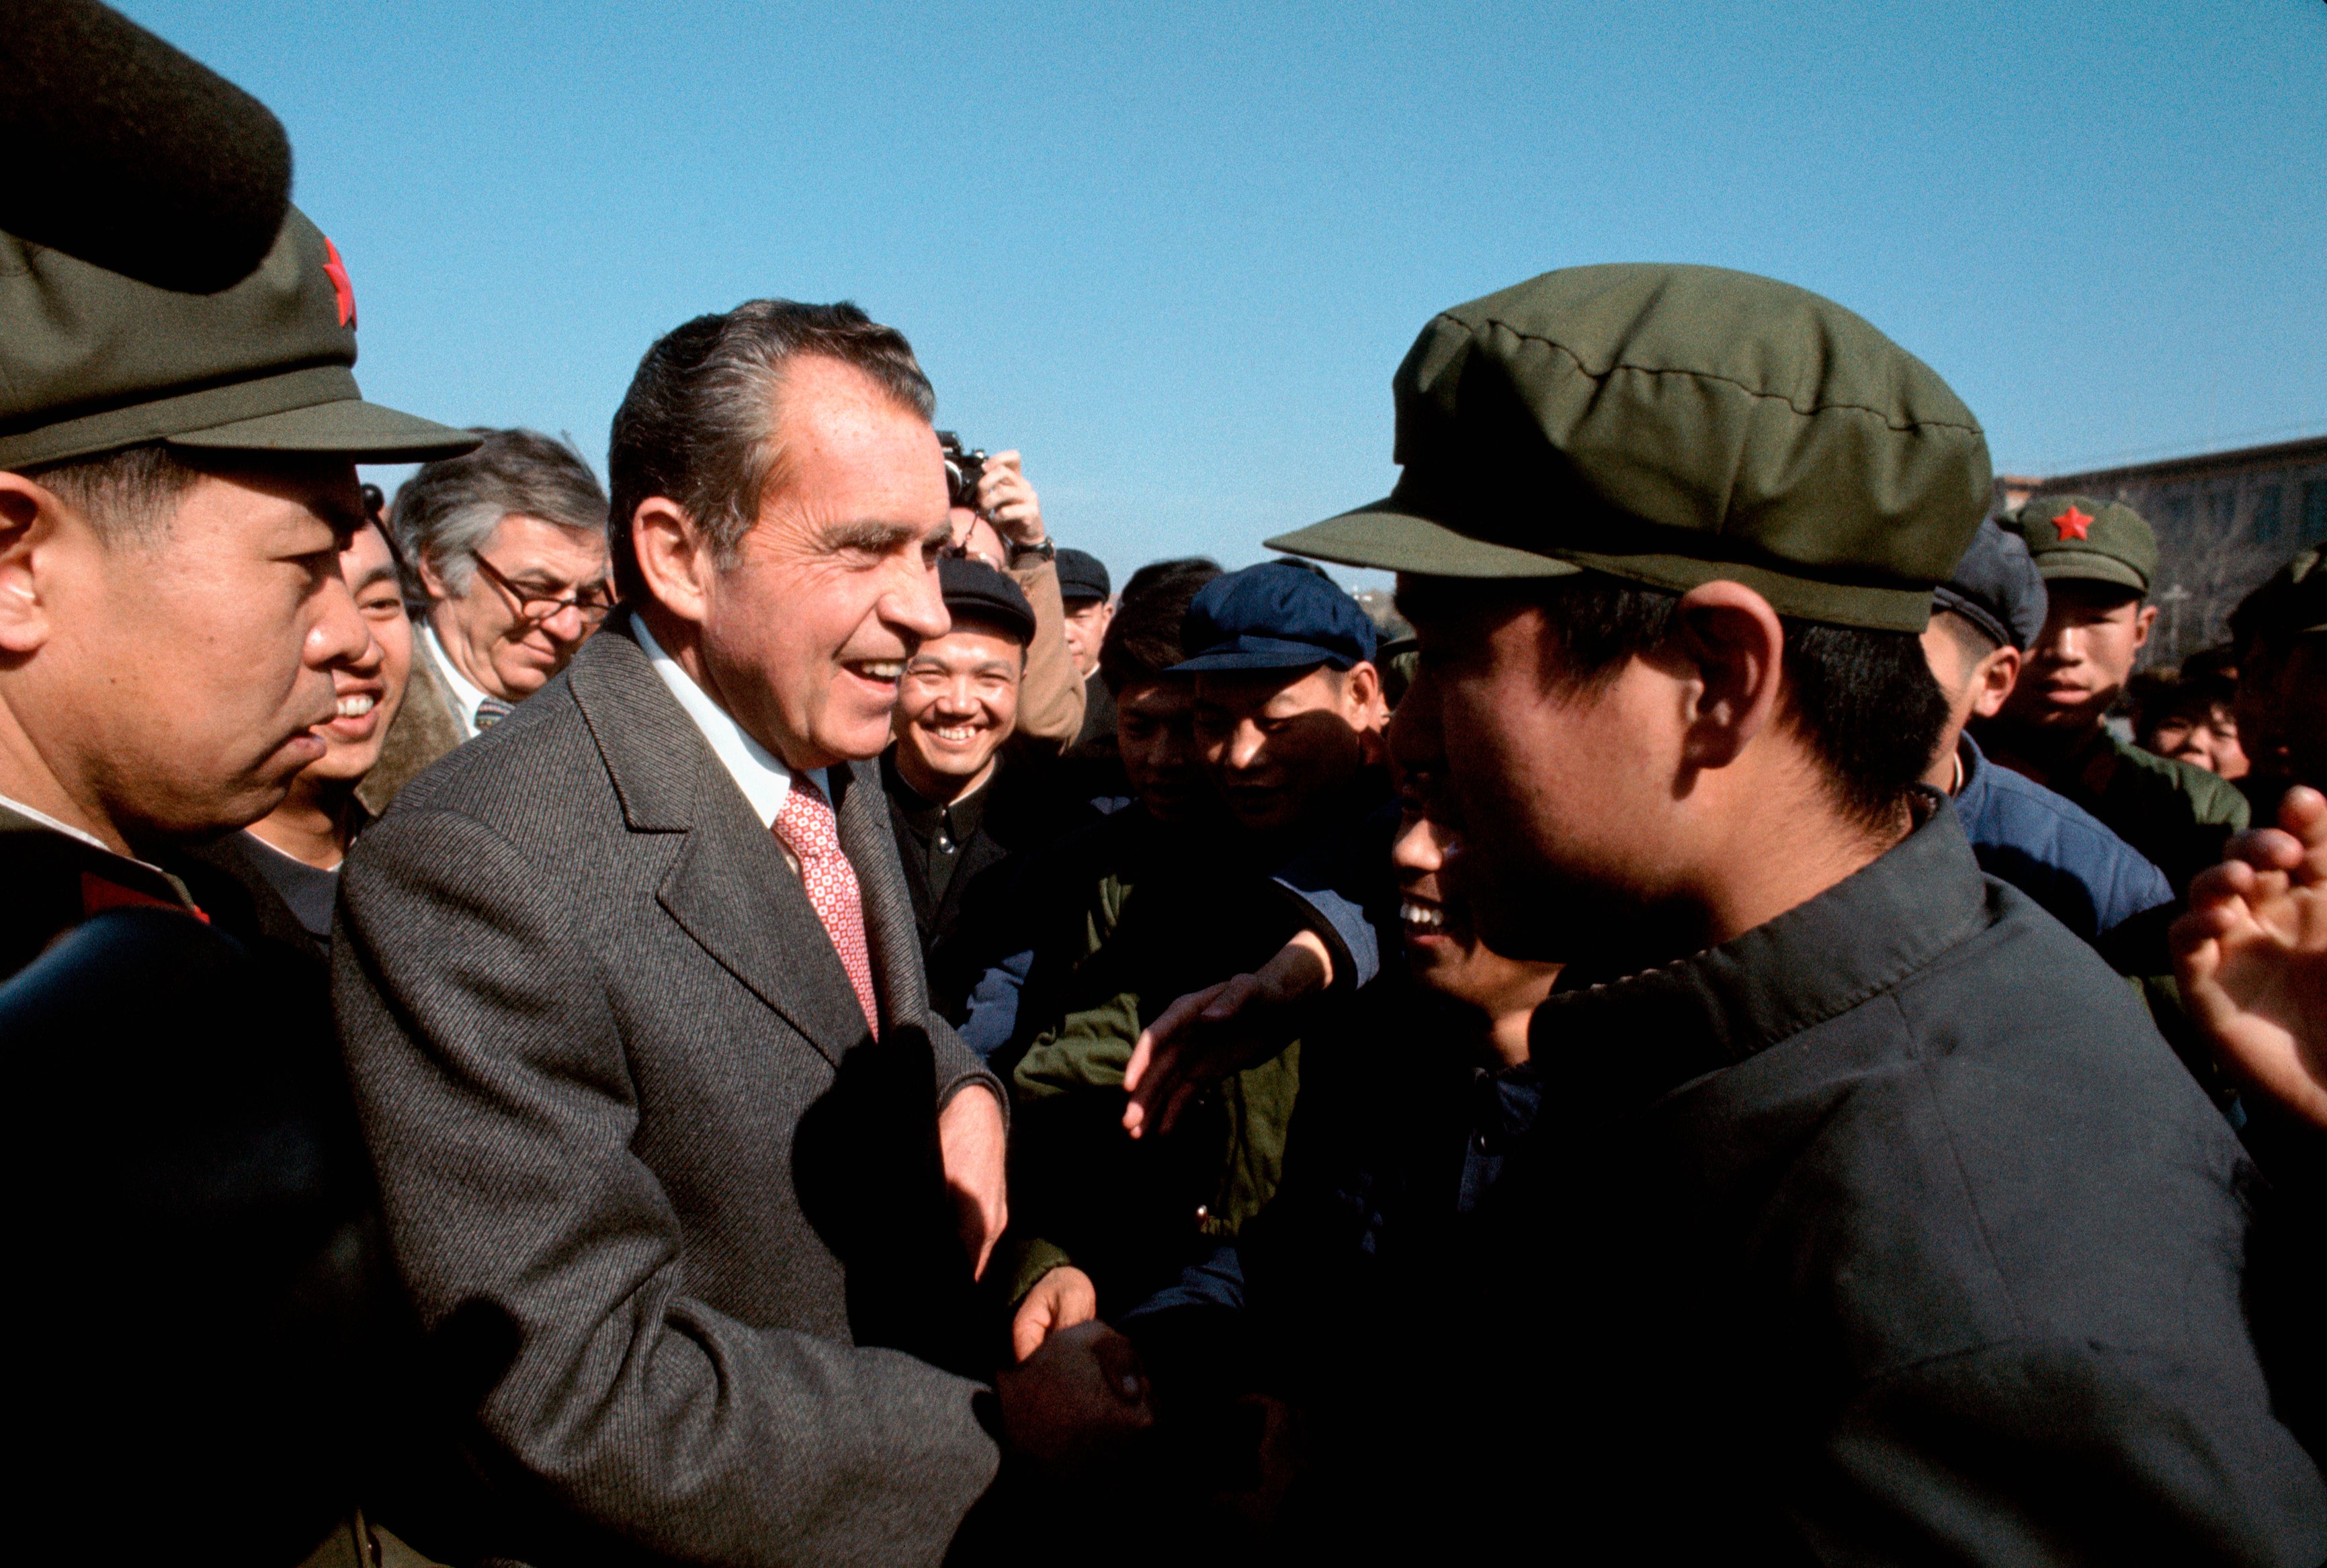 Richard Nixon Shaking Hands with Chinese Citizens